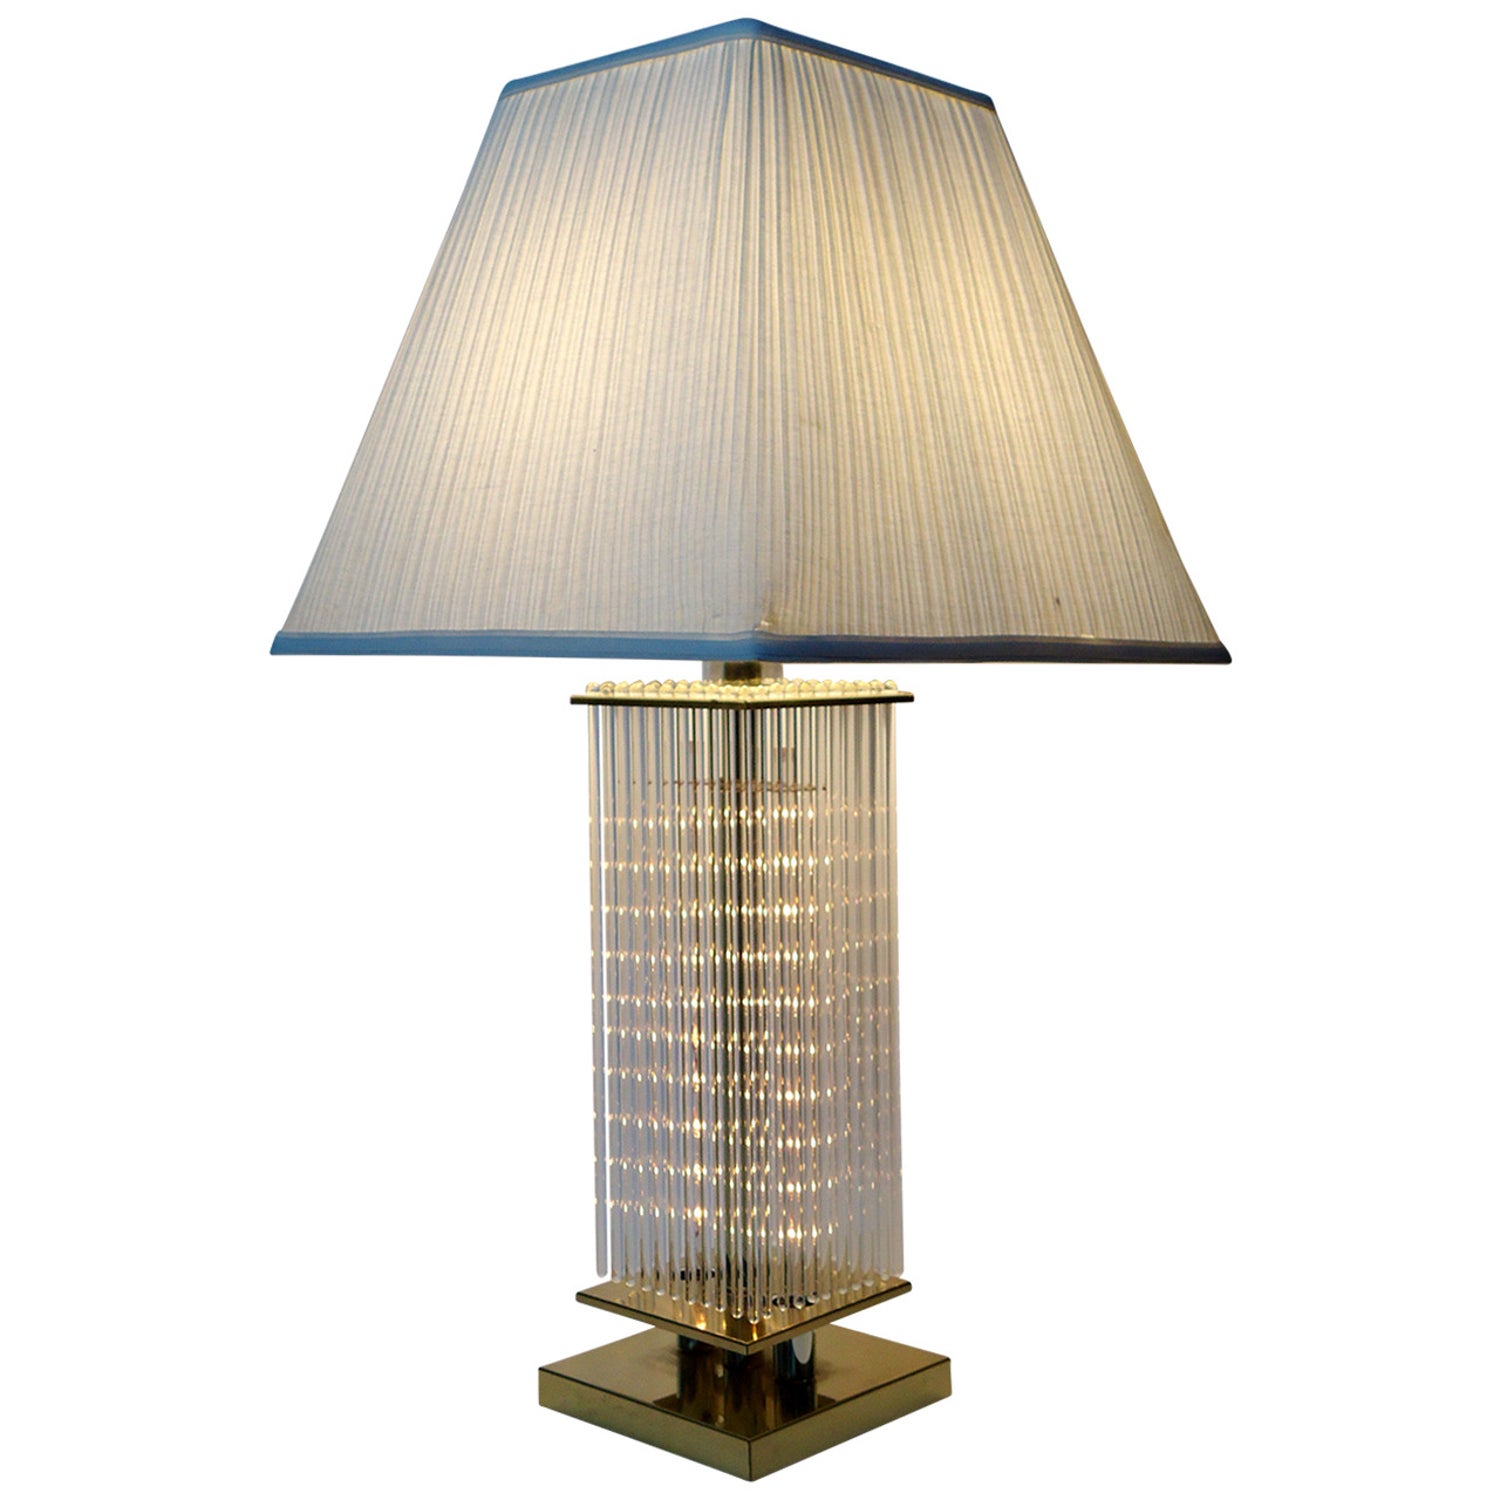 Liteline Glass Cane Table Lamp In The, Table Lamps Chicago Styles